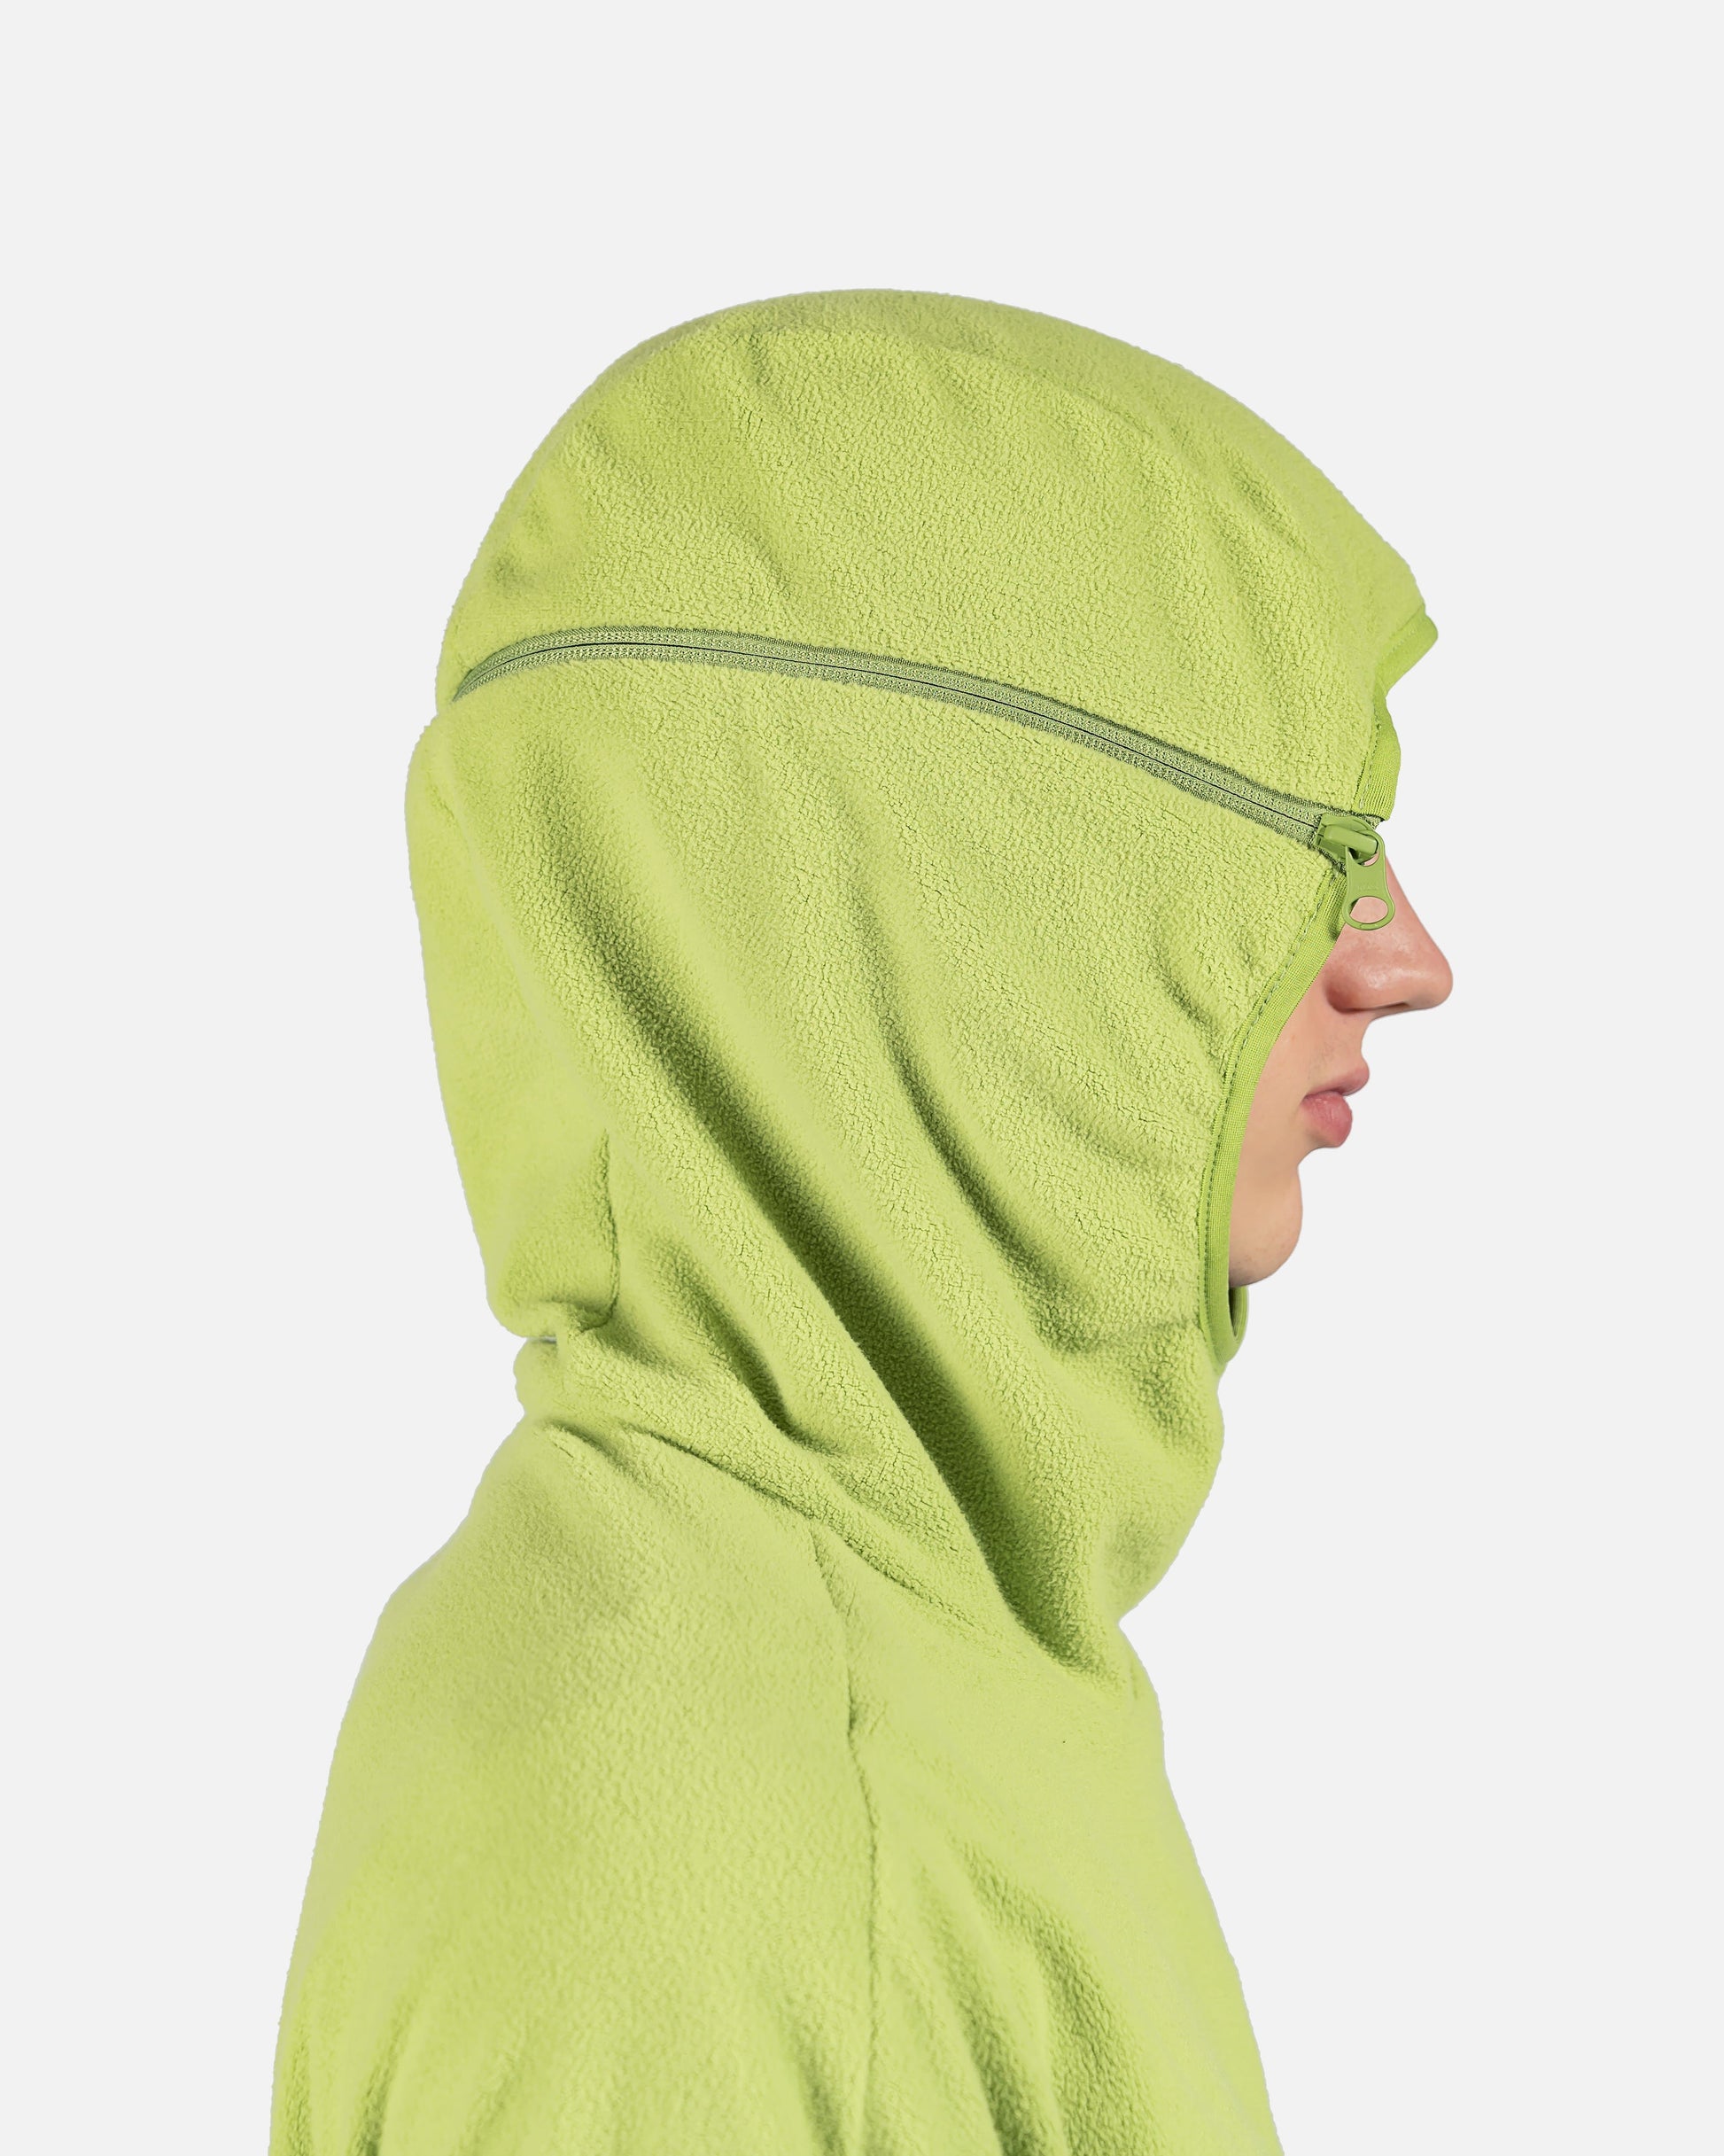 POST ARCHIVE FACTION (P.A.F) Men's Sweatshirts 4.0+ Hoodie Center in Neon Green